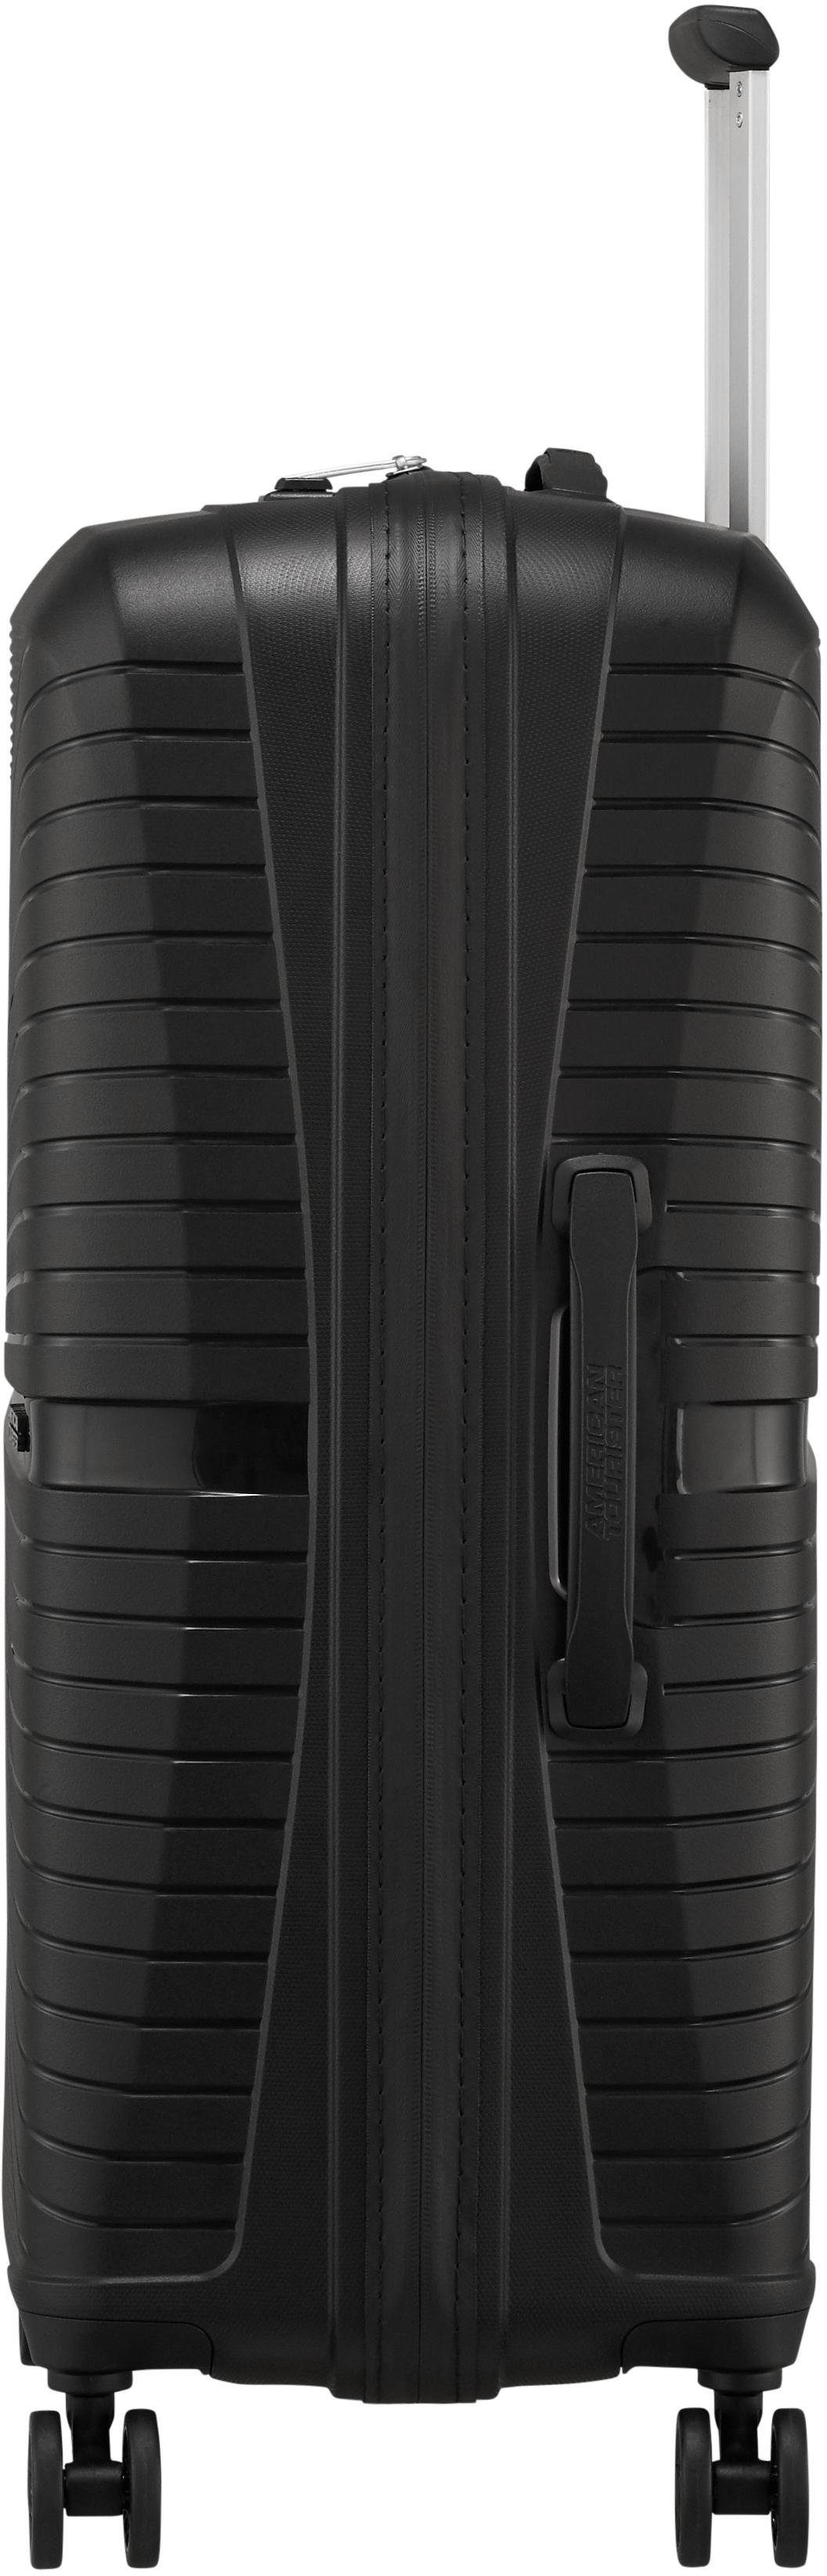 Onyx AIRCONIC Tourister® Rollen Koffer American 4 Spinner 67, Black